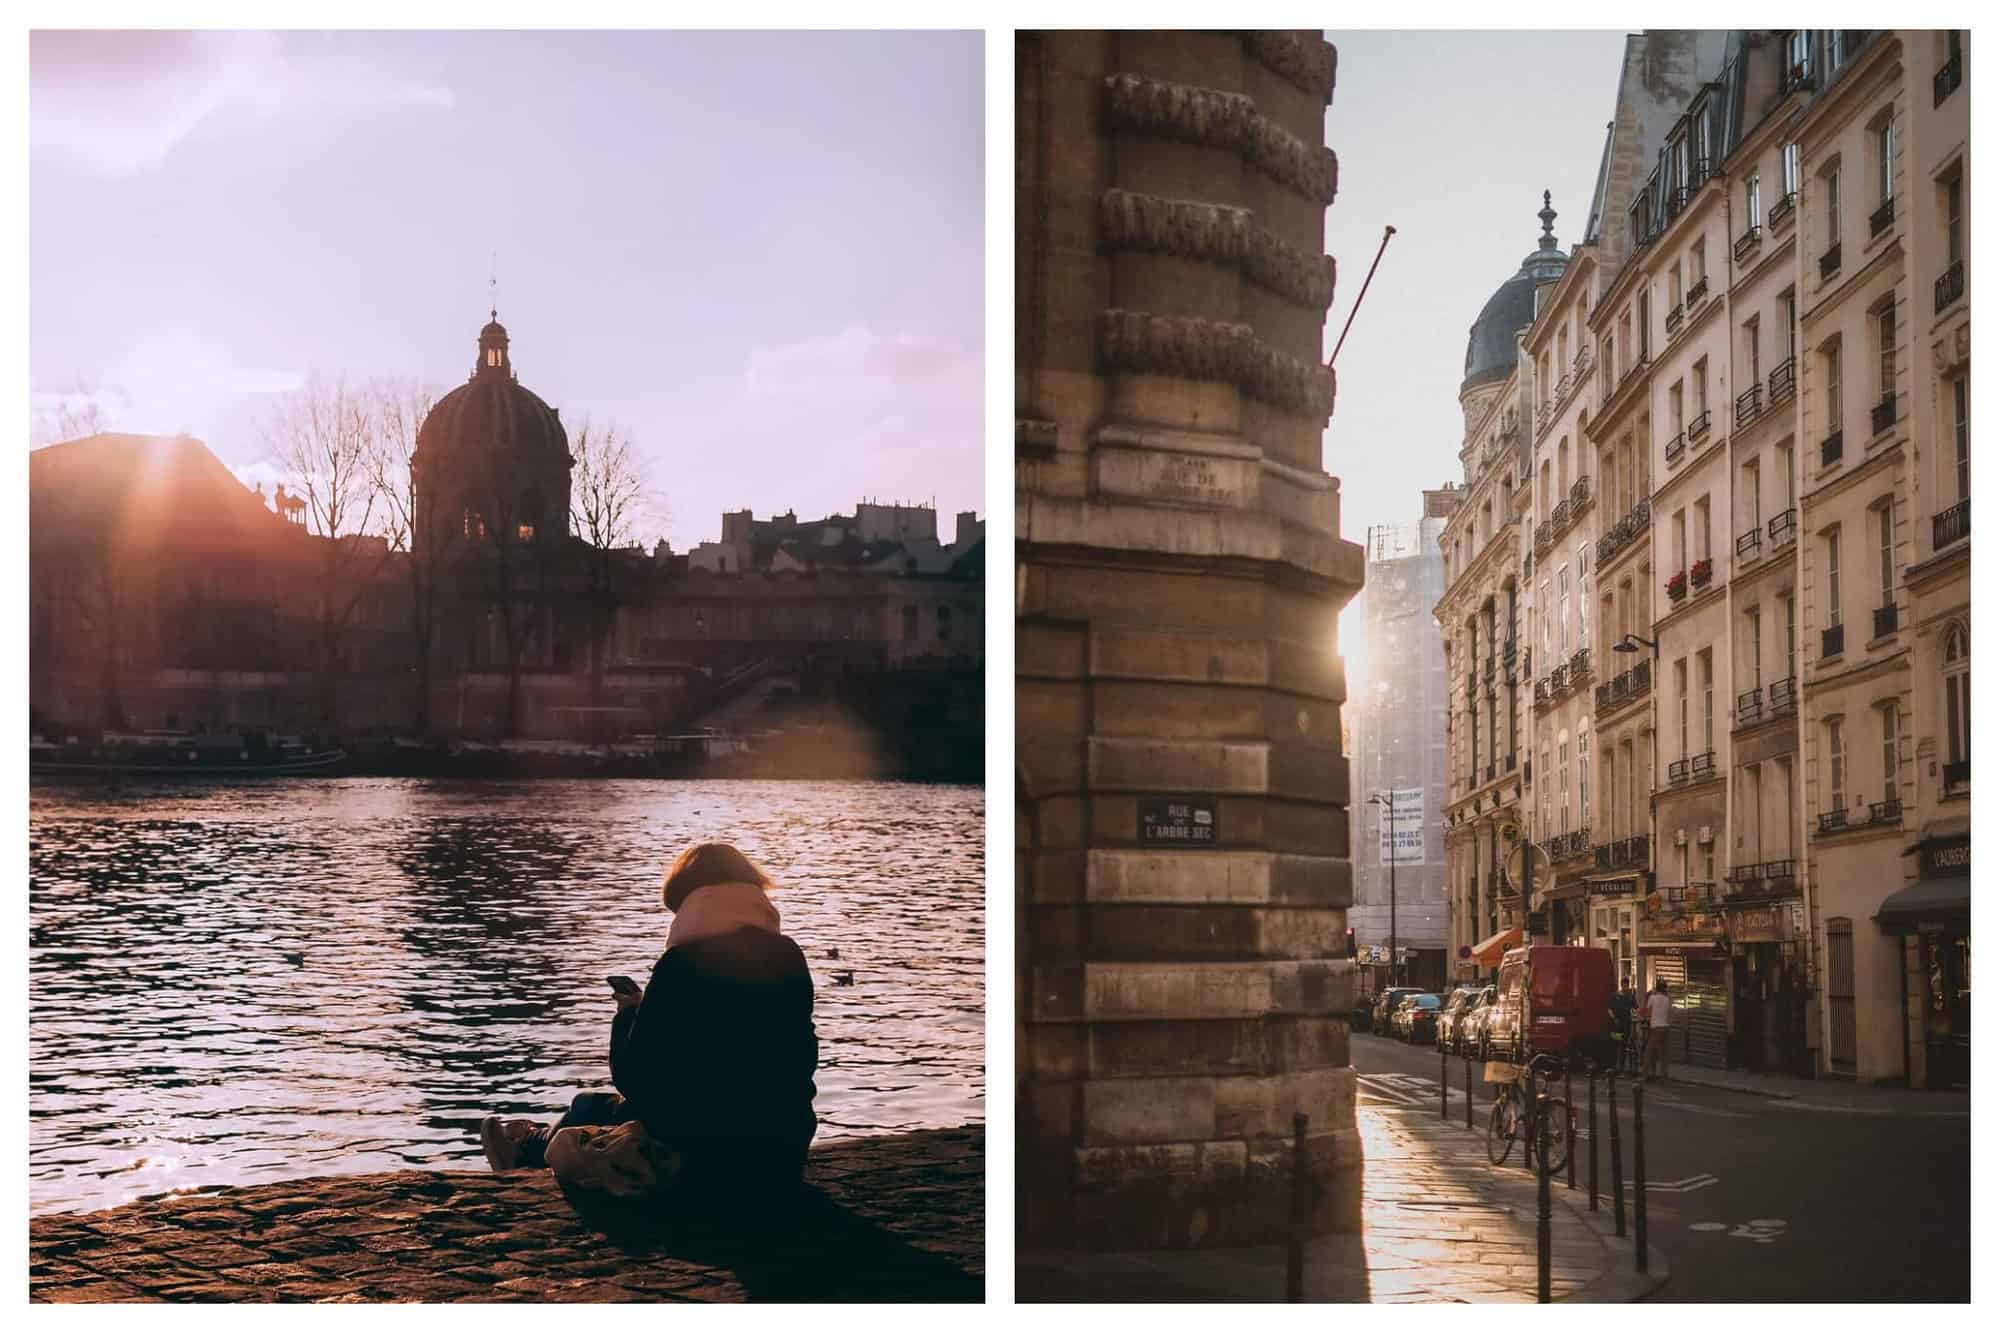 On the left is a woman in a black coat and yellow scarf seated by the banks of the Seine River during sunset. On the right is a Parisian street full of beige buildings, a red truck, and some cars.